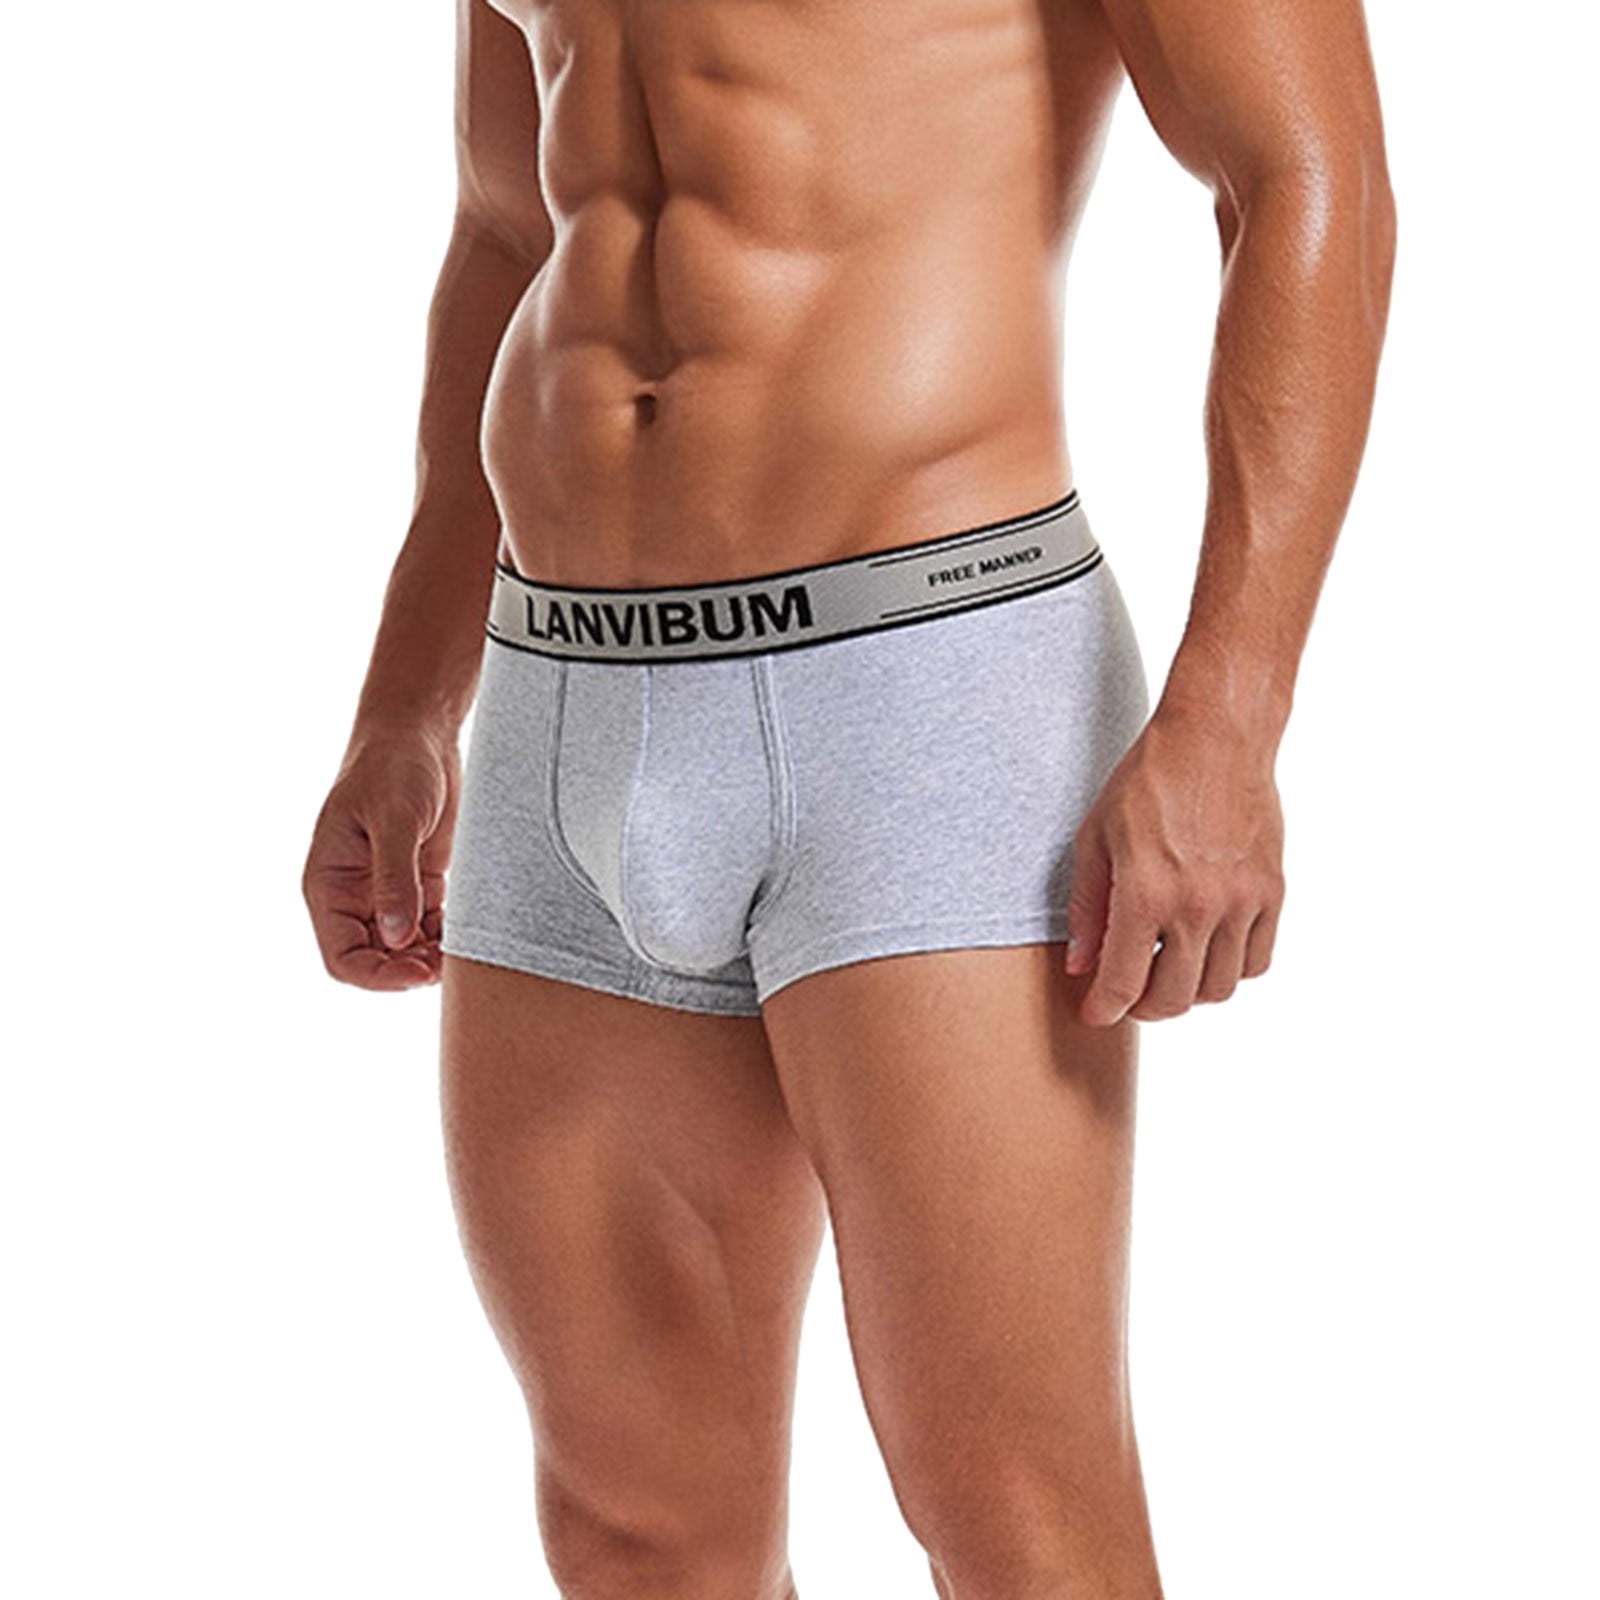 Underpants Mens Boxer Shorts Rich Cotton Elasticated Pack Underwear Home  Boxers Pajamas Loose Thin Breathable Gym Panties 230419 From Long01, $8.74